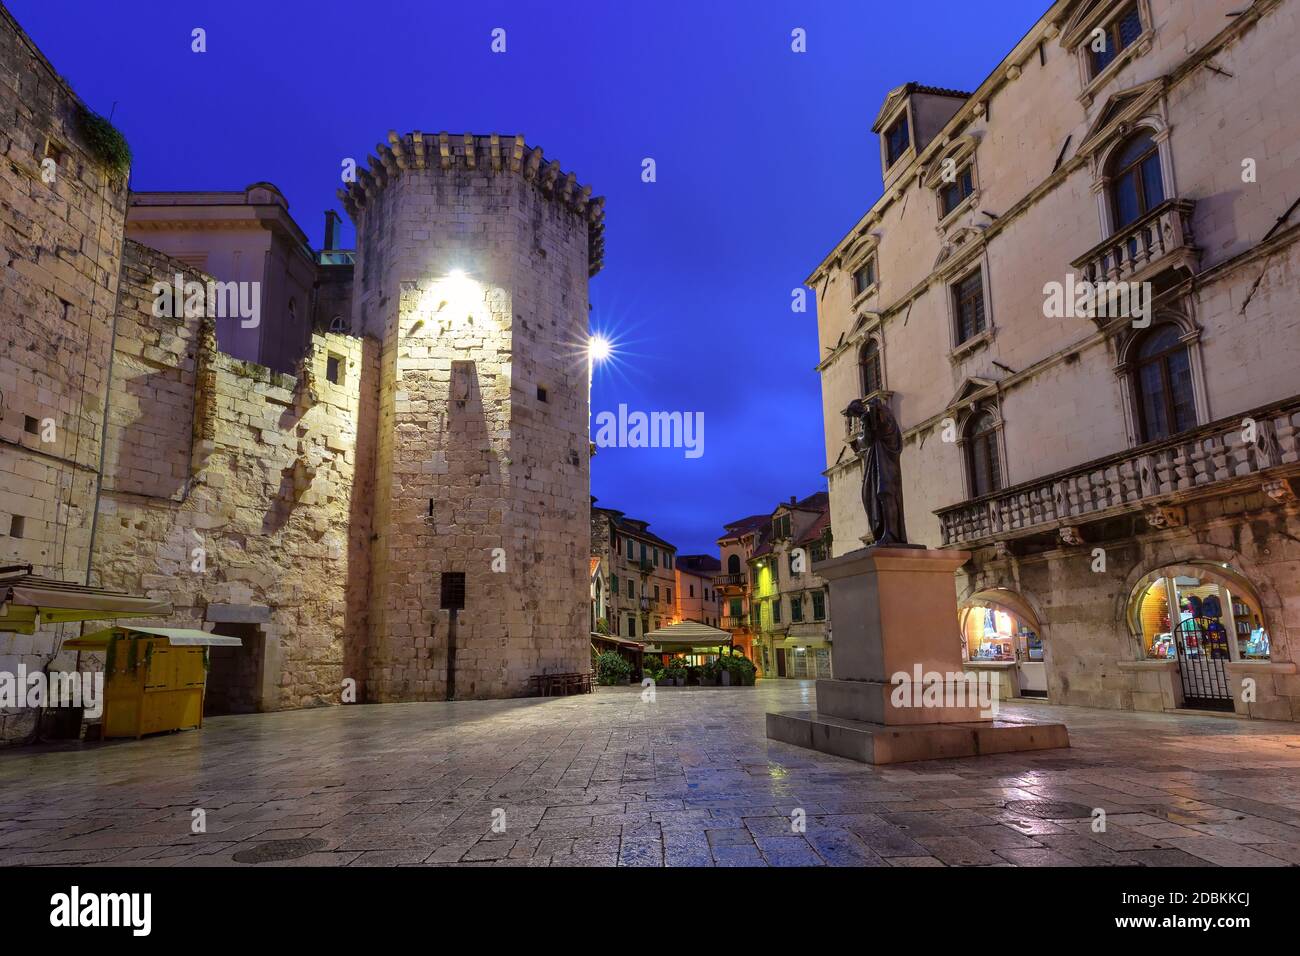 Empty Night Fruit square and Venetian Tower in the Diocletian Palace section of Medieval Old town of Split, Croatia Stock Photo